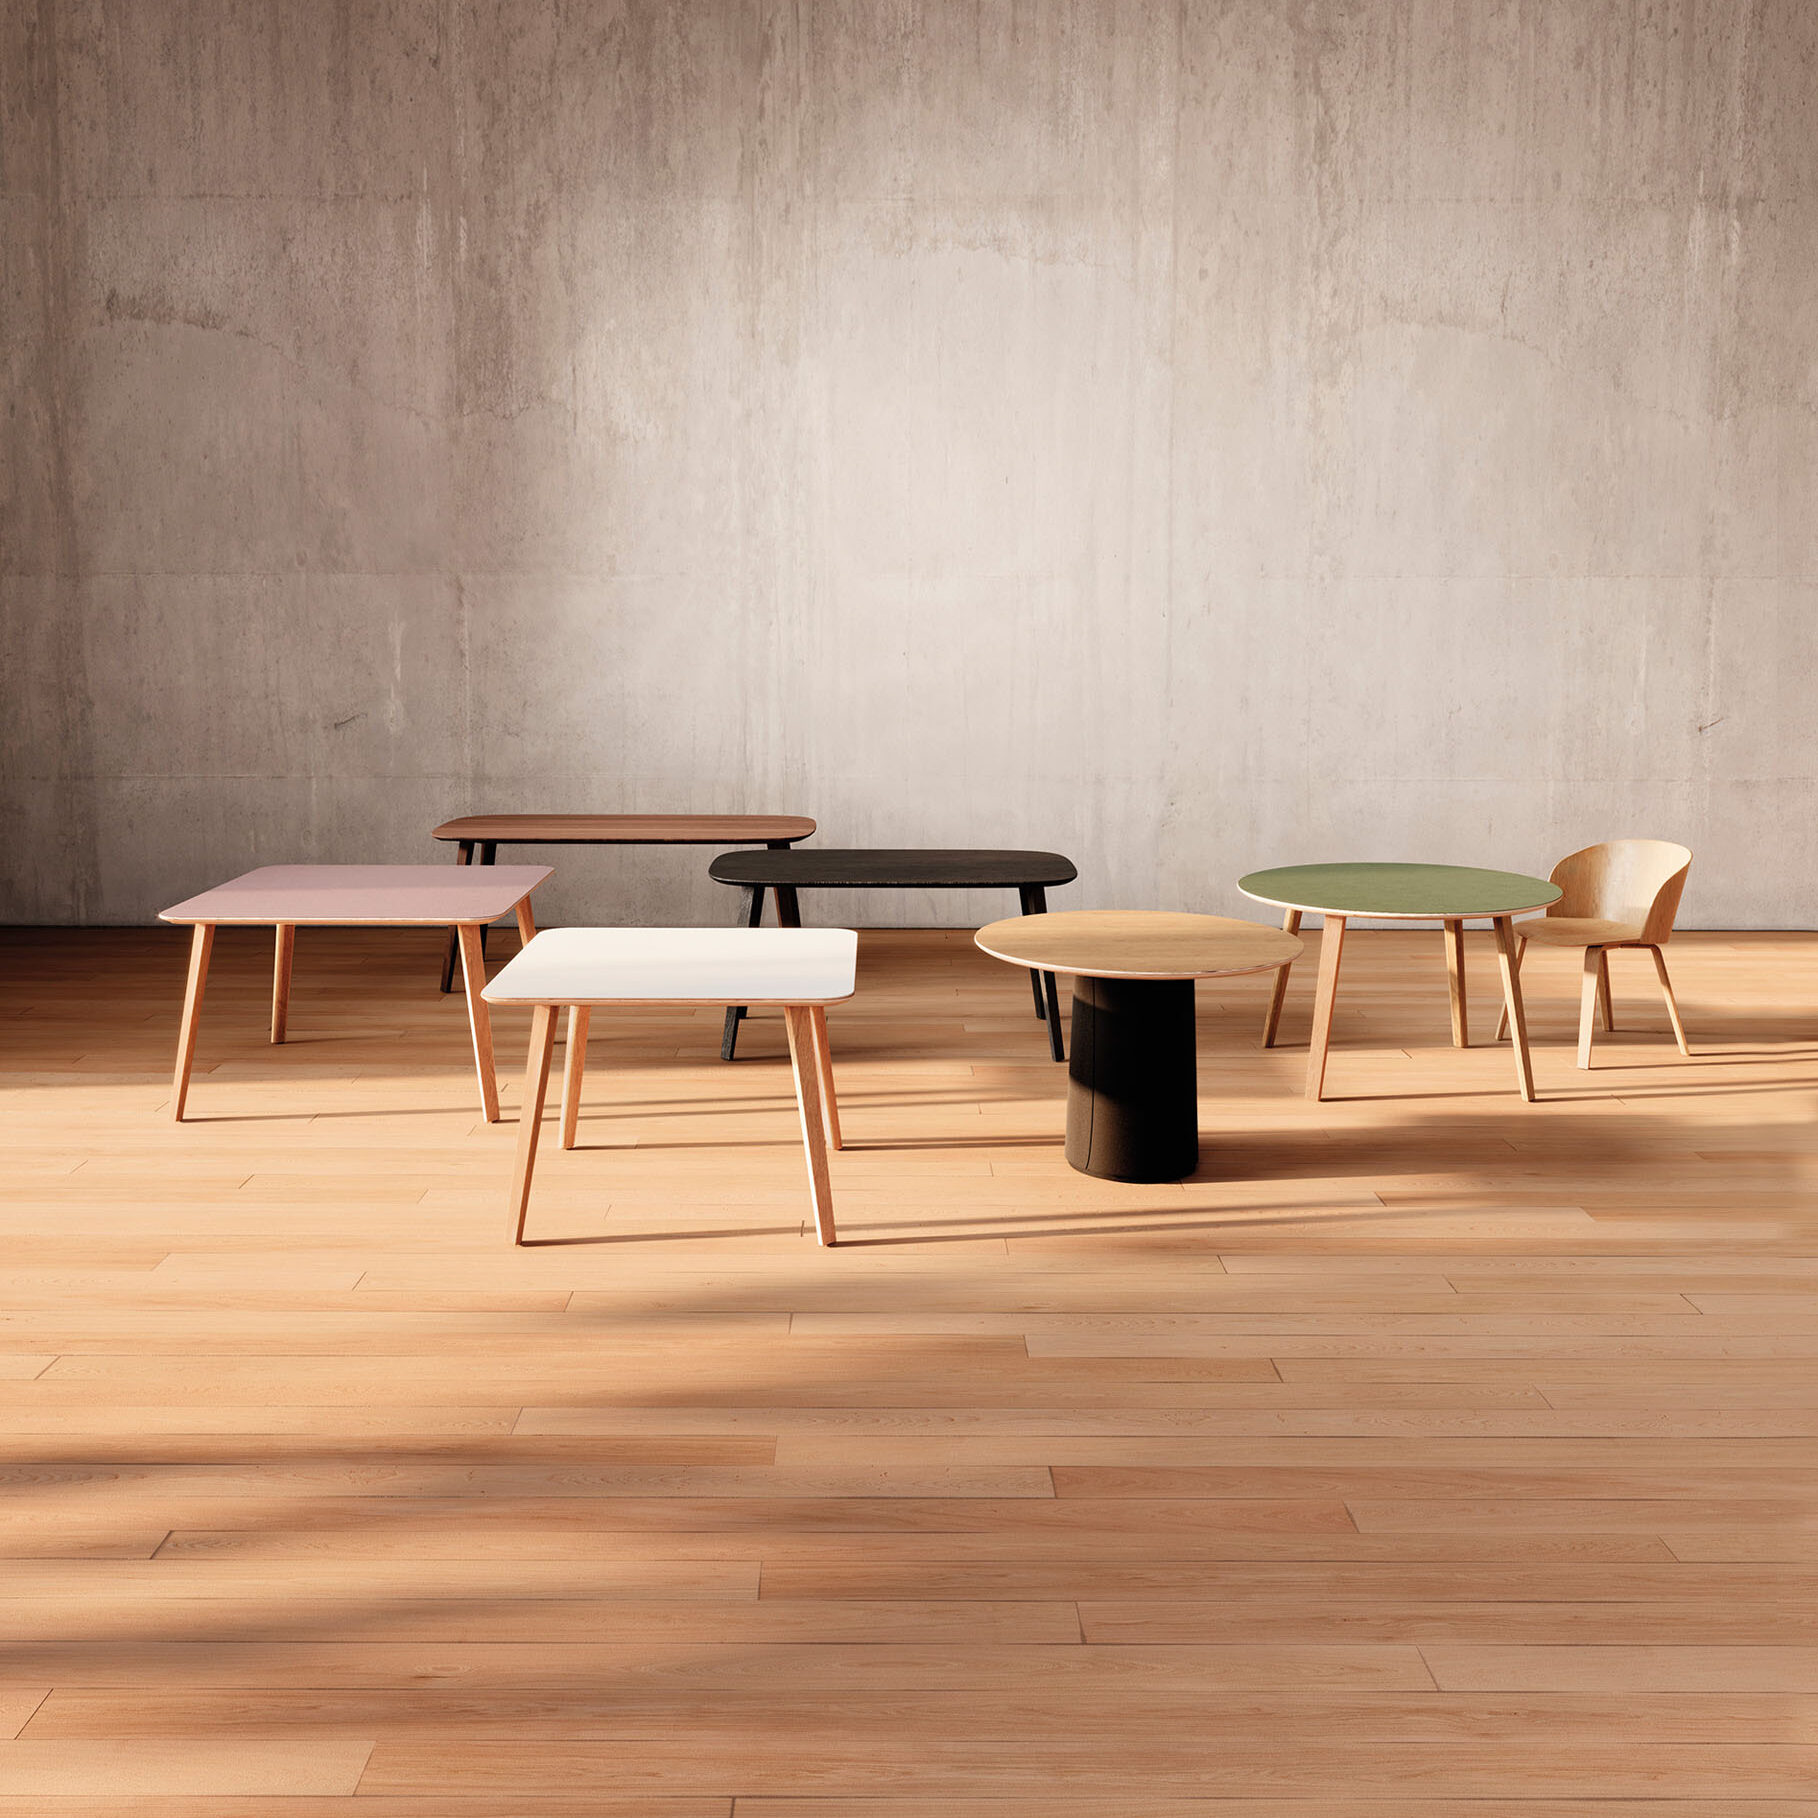 a collection of wooden tables